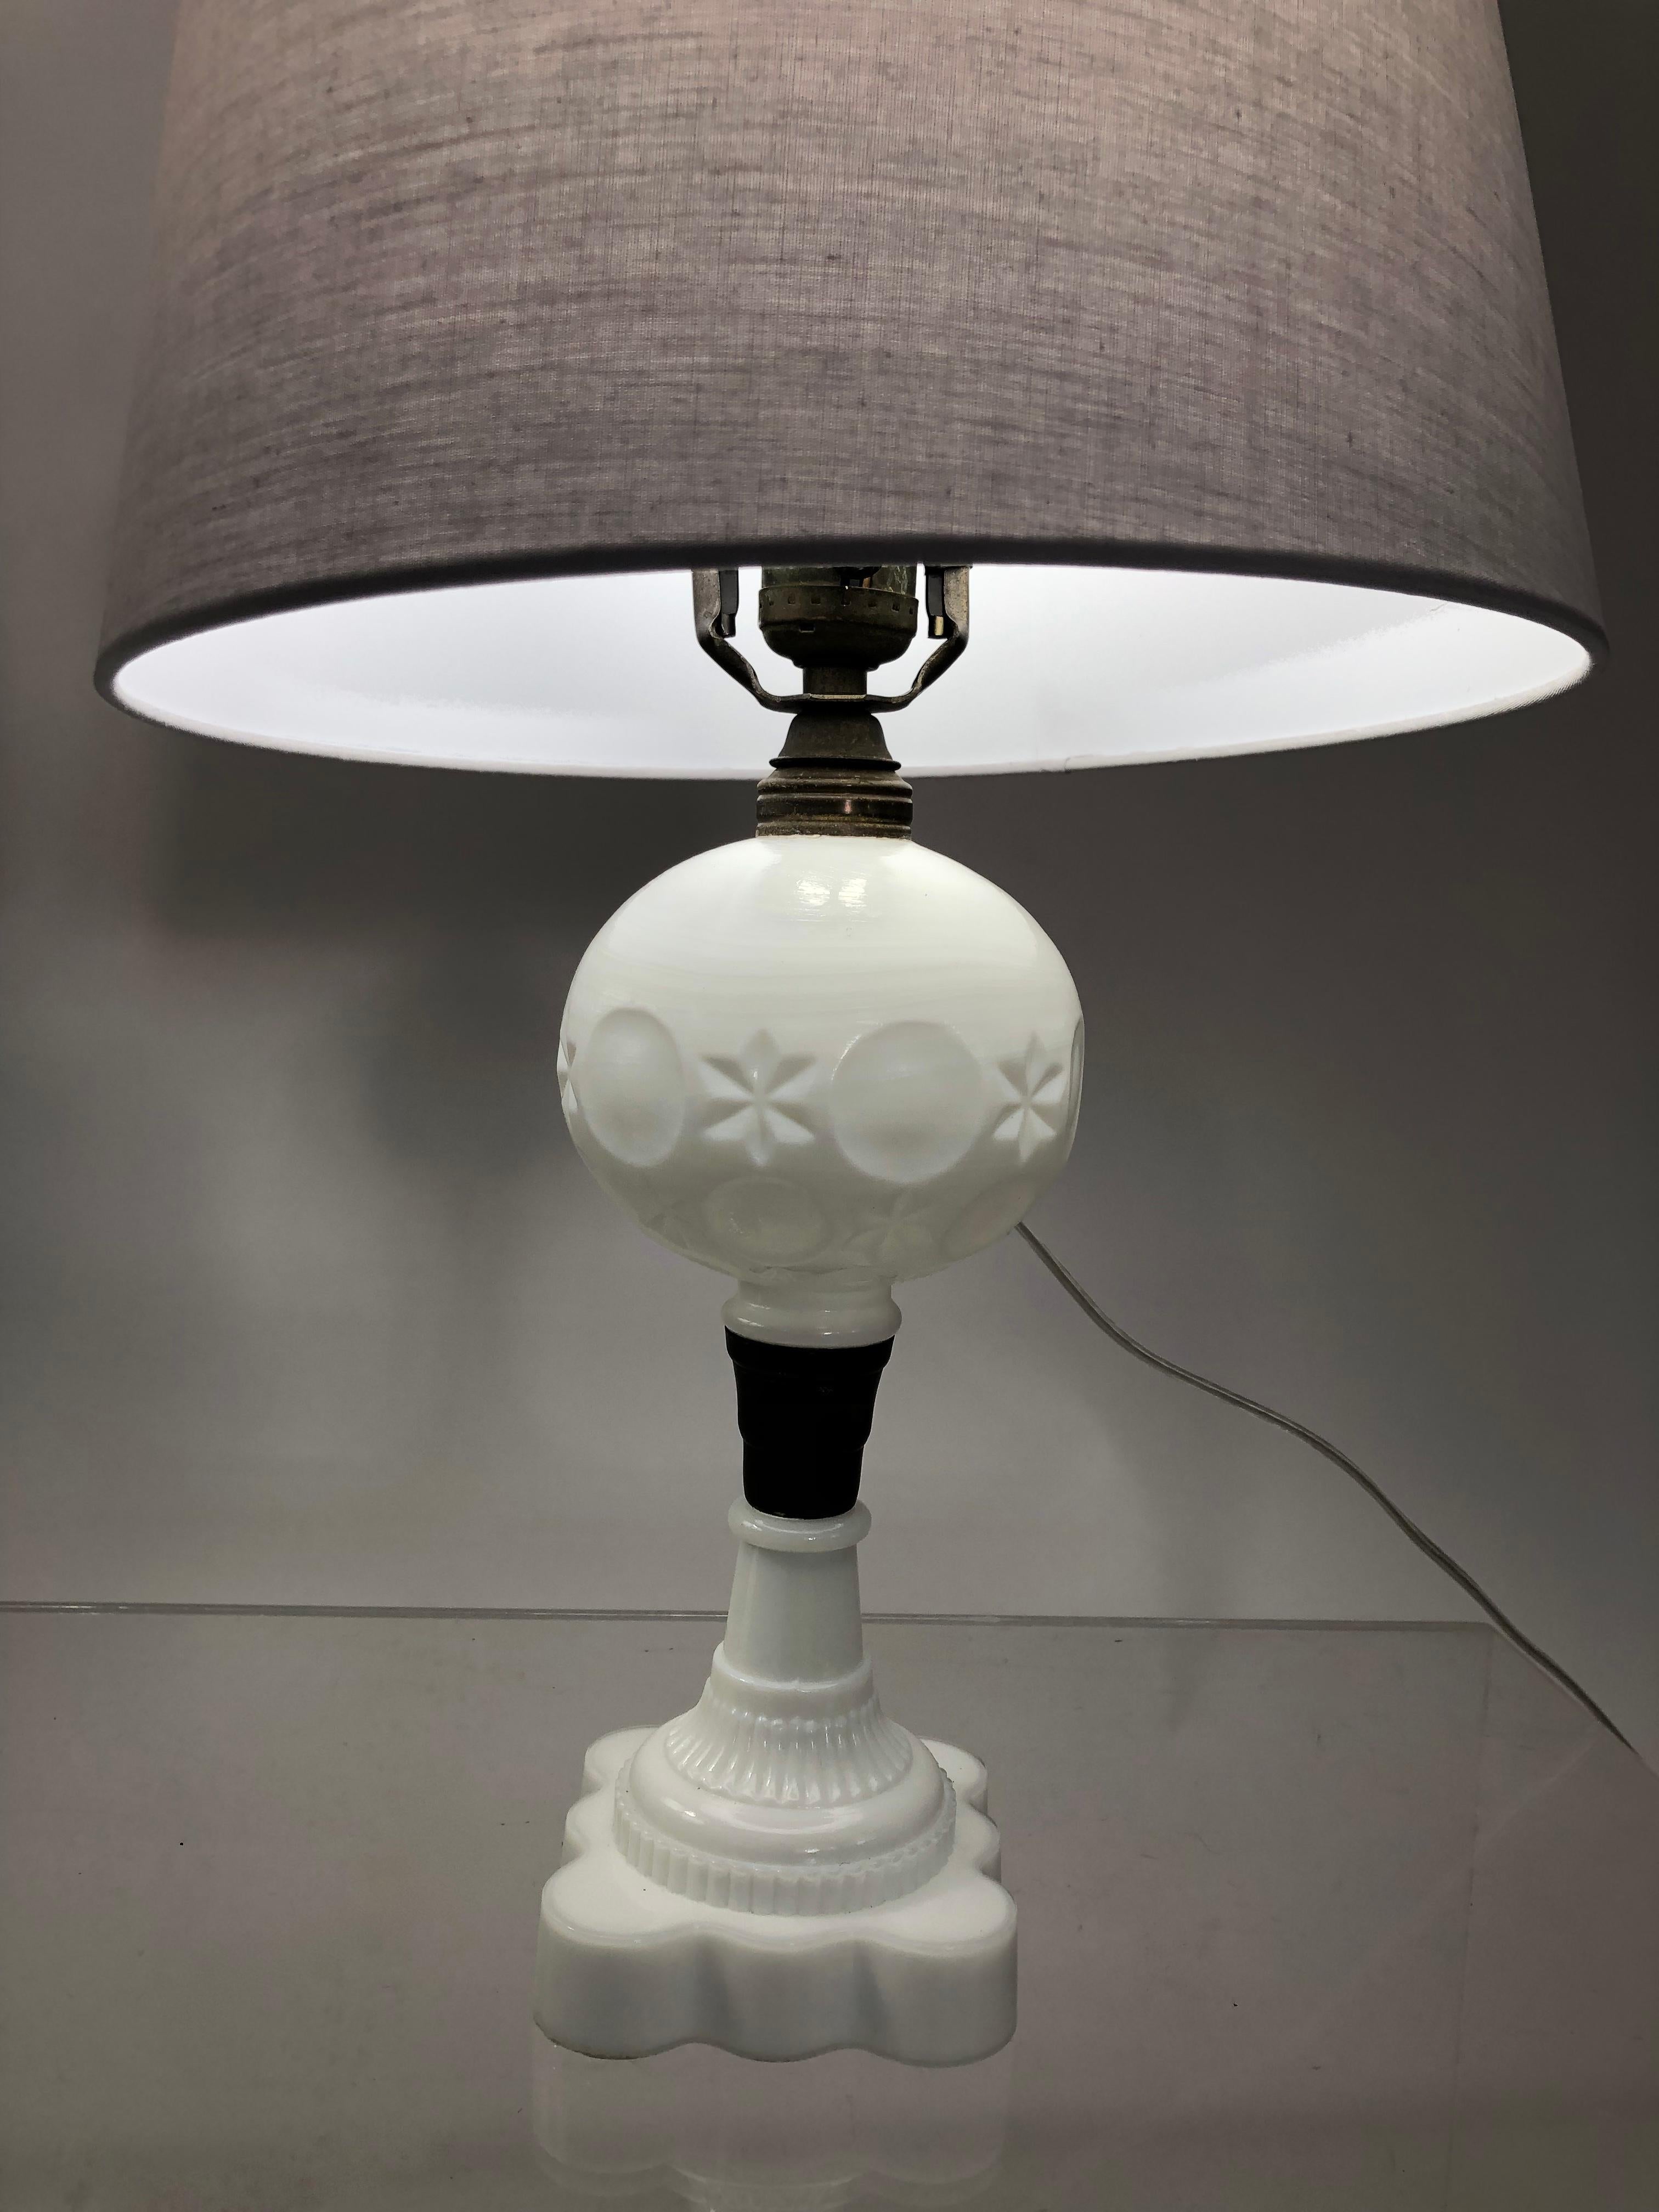 A pair of 19th century American milk glass whale oil lamps, decorated with embossed stars and circles or full moons, on fluted tapering columns and shaped square bases. New grey linen shades and white glazed pottery ball finials. Newly